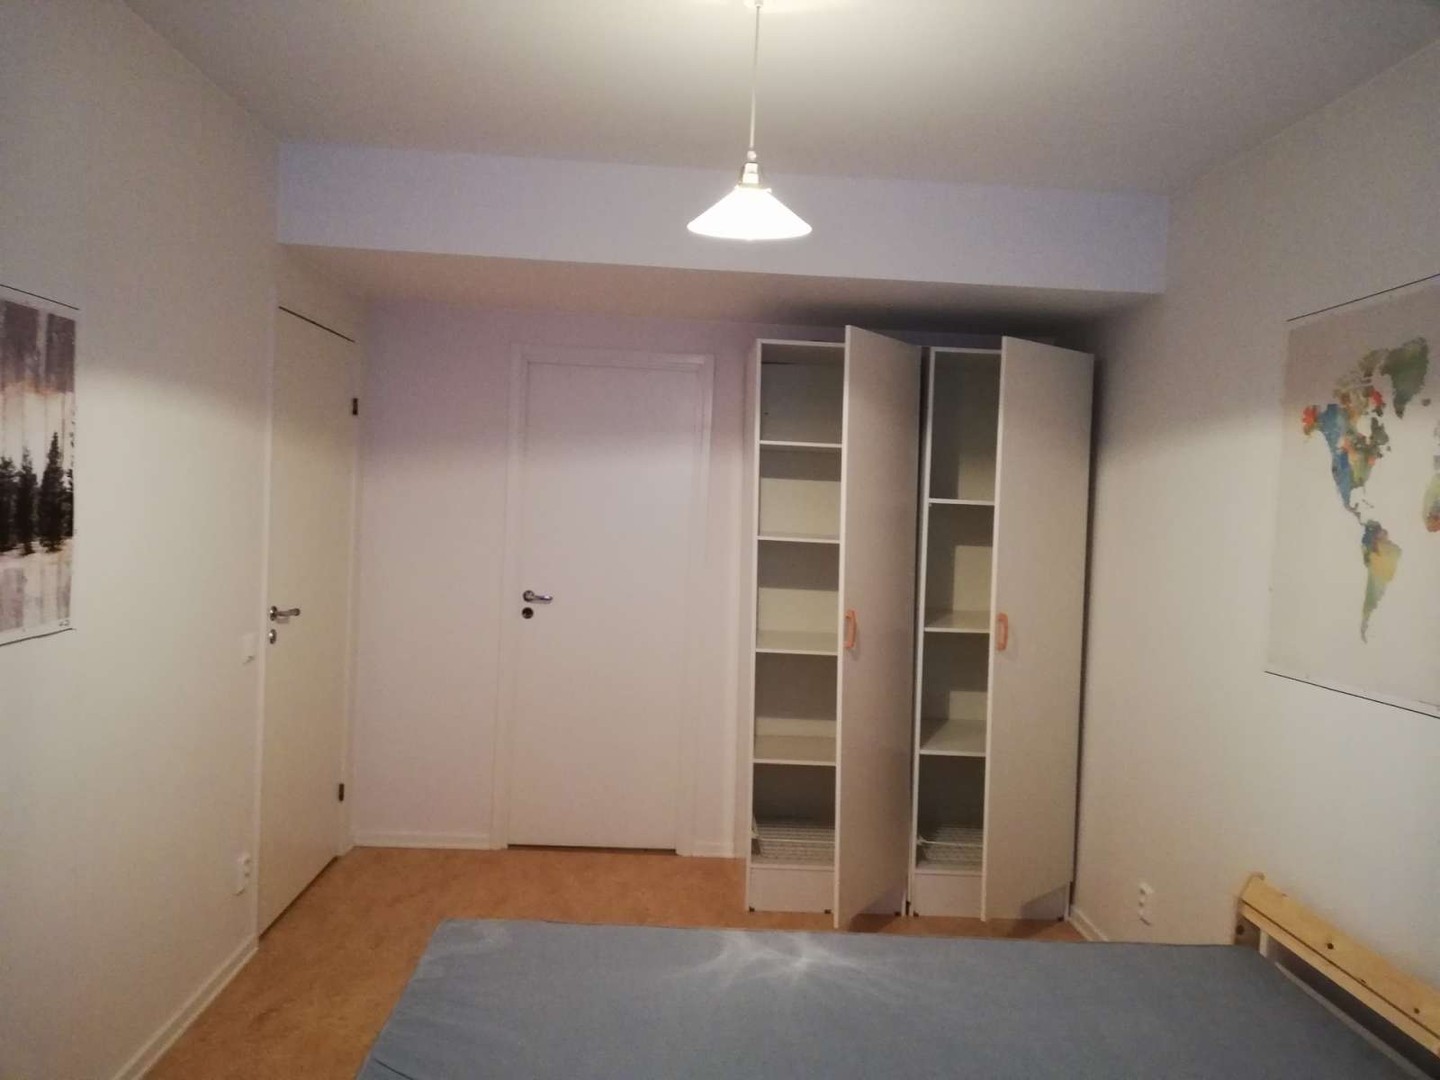 Room for rent with double bed Stockholm